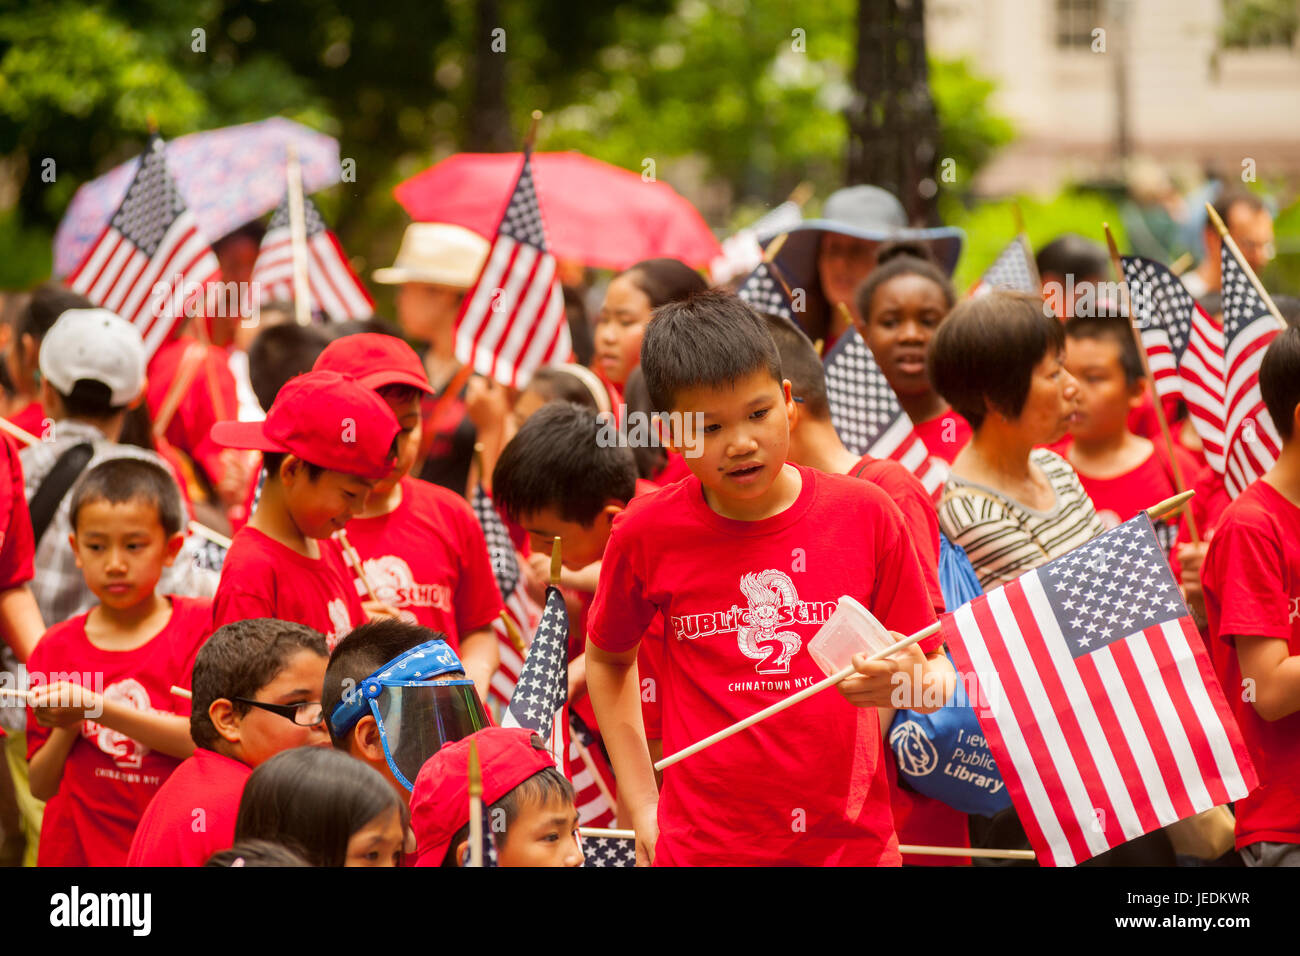 Students from PS 2 prepare to march in the annual Flag Day Parade in New York on Wednesday, June 14, 2017, starting at New York City Hall Park.  Flag Day was created by proclamation by President Woodrow Wilson on June 14, 1916 as a holiday honoring America's flag but it was not until 1949 when it became National Flag Day.  The holiday honors the 1777 Flag Resolution where the stars and stripes were officially adopted as the flag of the United States. (© Richard B. Levine) Stock Photo